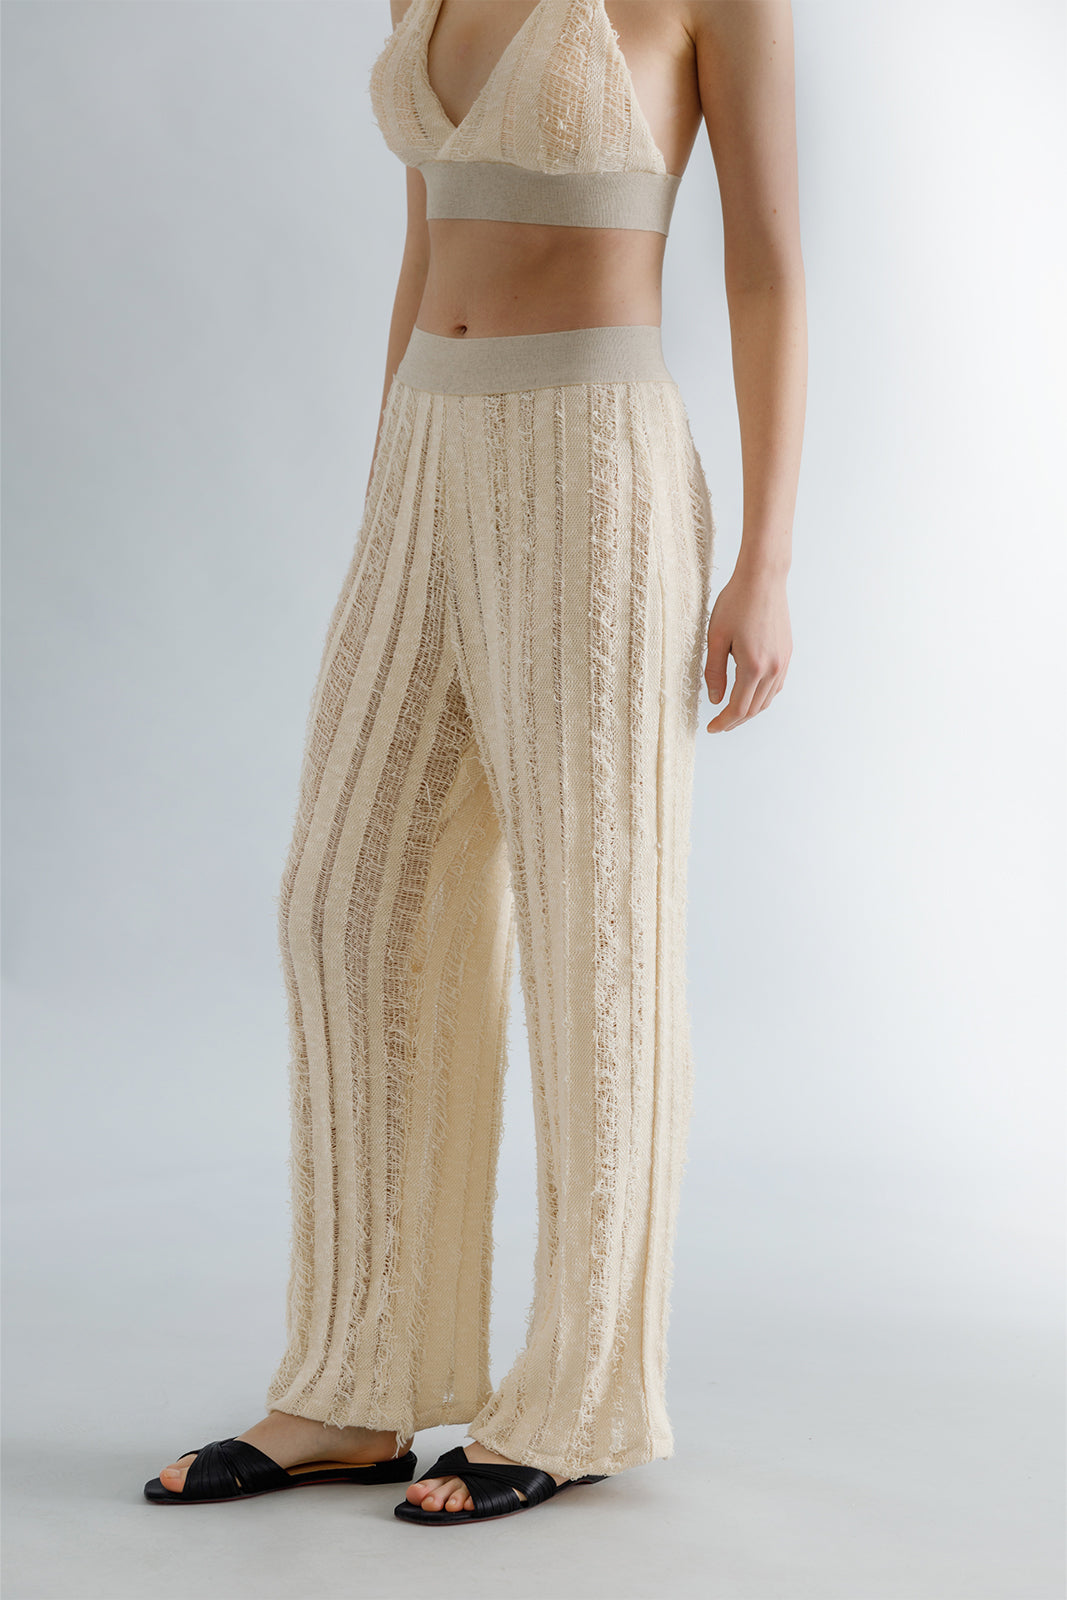 Knitted Nude Pants